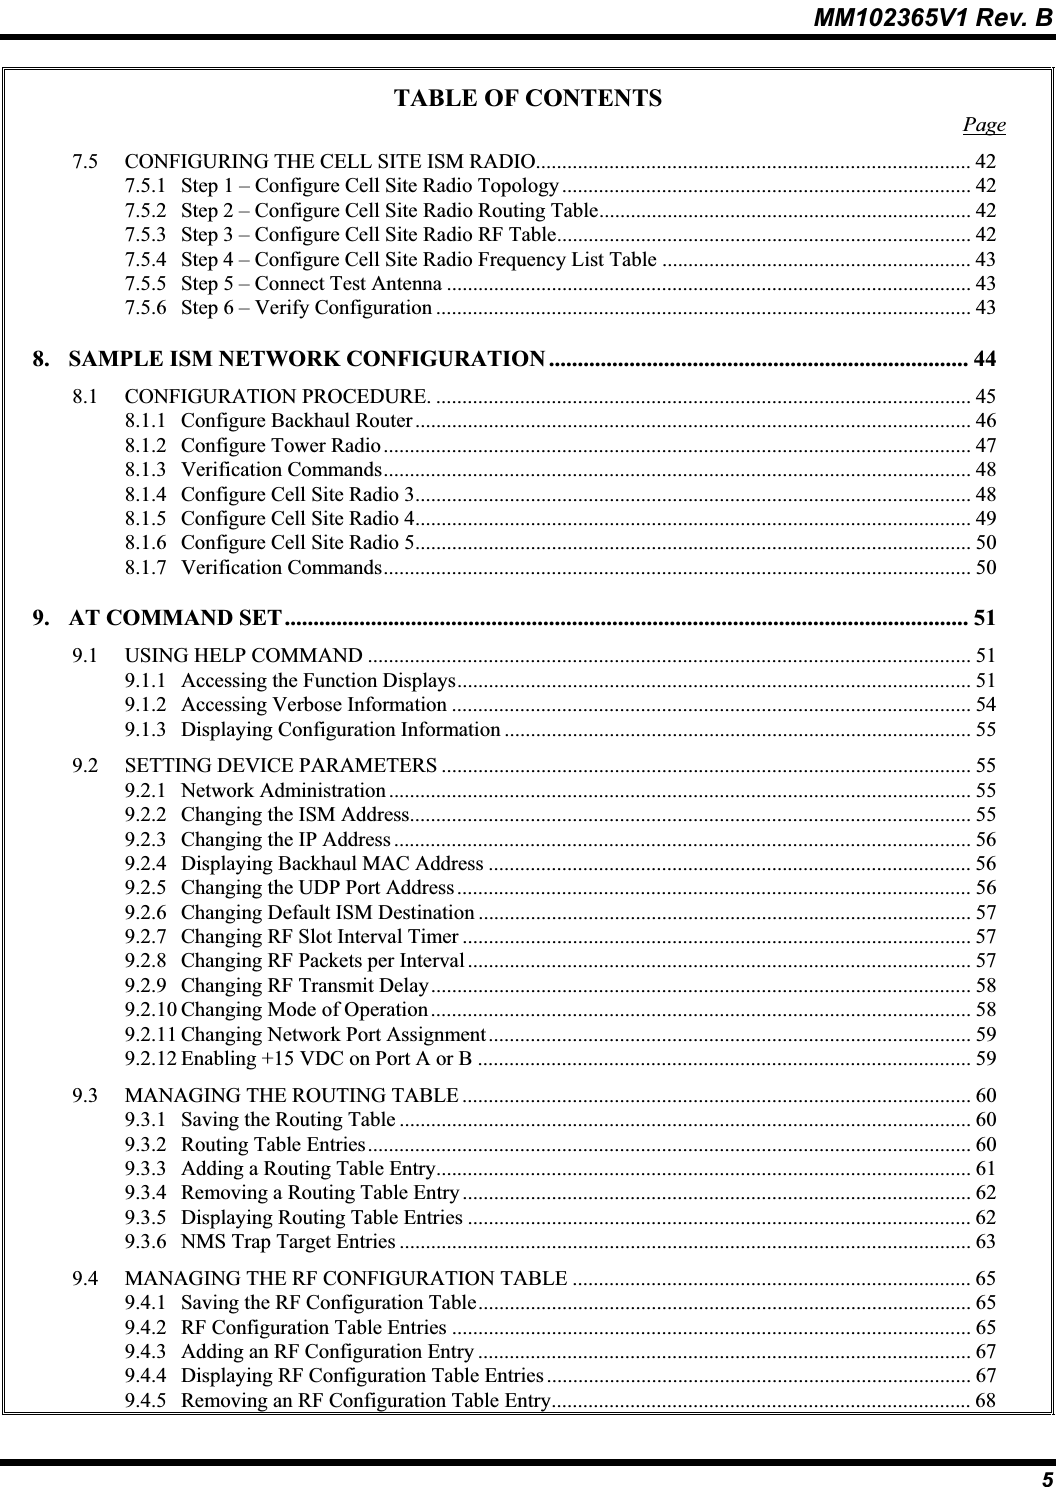 MM102365V1 Rev. B TABLE OF CONTENTS Page7.5 CONFIGURING THE CELL SITE ISM RADIO................................................................................... 427.5.1 Step 1 – Configure Cell Site Radio Topology.............................................................................. 427.5.2 Step 2 – Configure Cell Site Radio Routing Table....................................................................... 427.5.3 Step 3 – Configure Cell Site Radio RF Table............................................................................... 427.5.4 Step 4 – Configure Cell Site Radio Frequency List Table ........................................................... 437.5.5 Step 5 – Connect Test Antenna .................................................................................................... 437.5.6 Step 6 – Verify Configuration ...................................................................................................... 438. SAMPLE ISM NETWORK CONFIGURATION ......................................................................... 448.1 CONFIGURATION PROCEDURE. ......................................................................................................458.1.1 Configure Backhaul Router .......................................................................................................... 468.1.2 Configure Tower Radio................................................................................................................ 478.1.3 Verification Commands................................................................................................................ 488.1.4 Configure Cell Site Radio 3.......................................................................................................... 488.1.5 Configure Cell Site Radio 4.......................................................................................................... 498.1.6 Configure Cell Site Radio 5.......................................................................................................... 508.1.7 Verification Commands................................................................................................................ 509. AT COMMAND SET....................................................................................................................... 519.1 USING HELP COMMAND ................................................................................................................... 519.1.1 Accessing the Function Displays.................................................................................................. 519.1.2 Accessing Verbose Information ................................................................................................... 549.1.3 Displaying Configuration Information ......................................................................................... 559.2 SETTING DEVICE PARAMETERS ..................................................................................................... 559.2.1 Network Administration ............................................................................................................... 559.2.2 Changing the ISM Address........................................................................................................... 559.2.3 Changing the IP Address .............................................................................................................. 569.2.4 Displaying Backhaul MAC Address ............................................................................................569.2.5 Changing the UDP Port Address.................................................................................................. 569.2.6 Changing Default ISM Destination .............................................................................................. 579.2.7 Changing RF Slot Interval Timer ................................................................................................. 579.2.8 Changing RF Packets per Interval ................................................................................................ 579.2.9 Changing RF Transmit Delay....................................................................................................... 589.2.10 Changing Mode of Operation ....................................................................................................... 589.2.11 Changing Network Port Assignment............................................................................................ 599.2.12 Enabling +15 VDC on Port A or B .............................................................................................. 599.3 MANAGING THE ROUTING TABLE ................................................................................................. 609.3.1 Saving the Routing Table ............................................................................................................. 609.3.2 Routing Table Entries................................................................................................................... 609.3.3 Adding a Routing Table Entry...................................................................................................... 619.3.4 Removing a Routing Table Entry................................................................................................. 629.3.5 Displaying Routing Table Entries ................................................................................................ 629.3.6 NMS Trap Target Entries ............................................................................................................. 639.4 MANAGING THE RF CONFIGURATION TABLE ............................................................................ 659.4.1 Saving the RF Configuration Table.............................................................................................. 659.4.2 RF Configuration Table Entries ................................................................................................... 659.4.3 Adding an RF Configuration Entry .............................................................................................. 679.4.4 Displaying RF Configuration Table Entries ................................................................................. 679.4.5 Removing an RF Configuration Table Entry................................................................................ 685